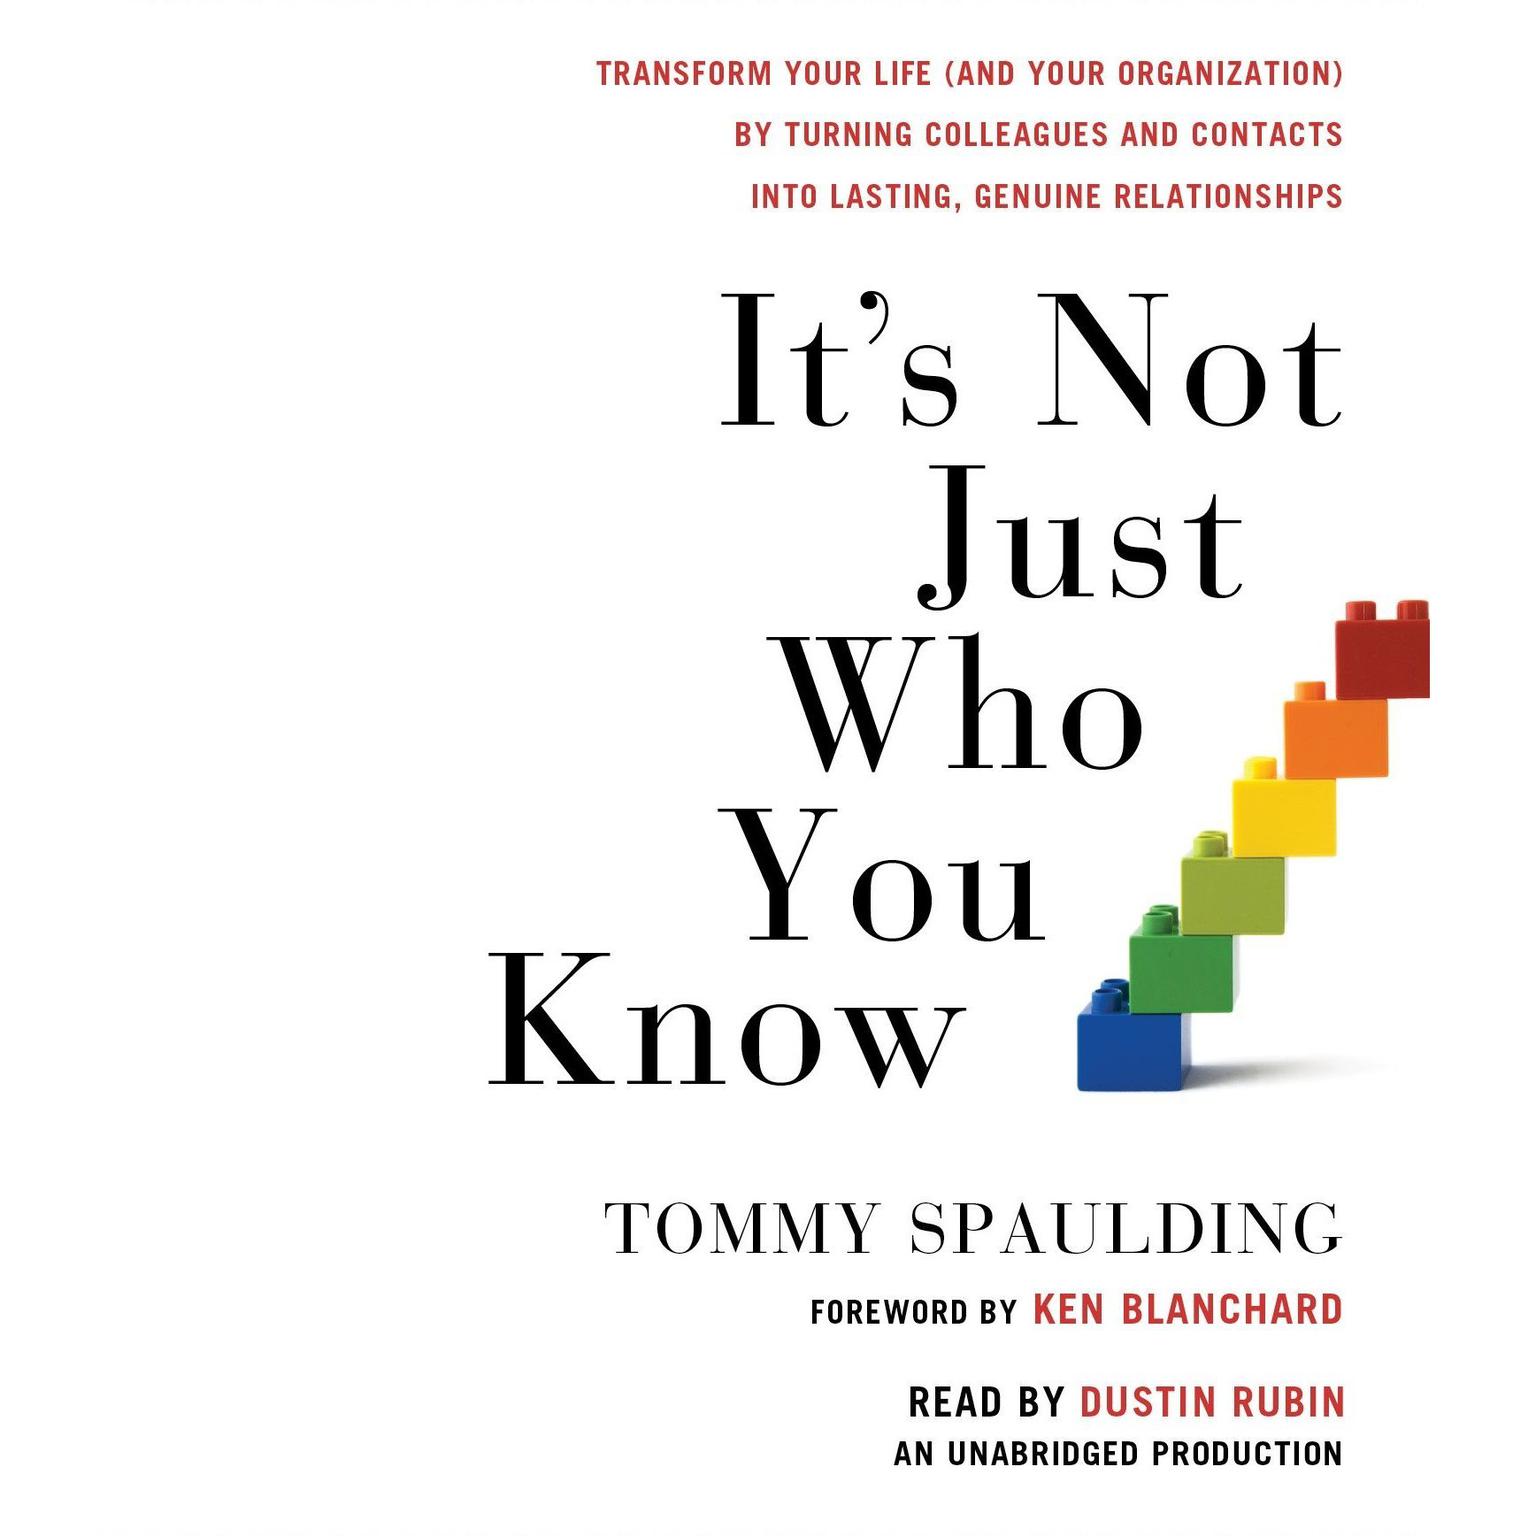 Its Not Just Who You Know: Transform Your Life (and Your Organization) by Turning Colleagues and Contacts into Lasting, Genuine Relationships Audiobook, by Tommy Spaulding